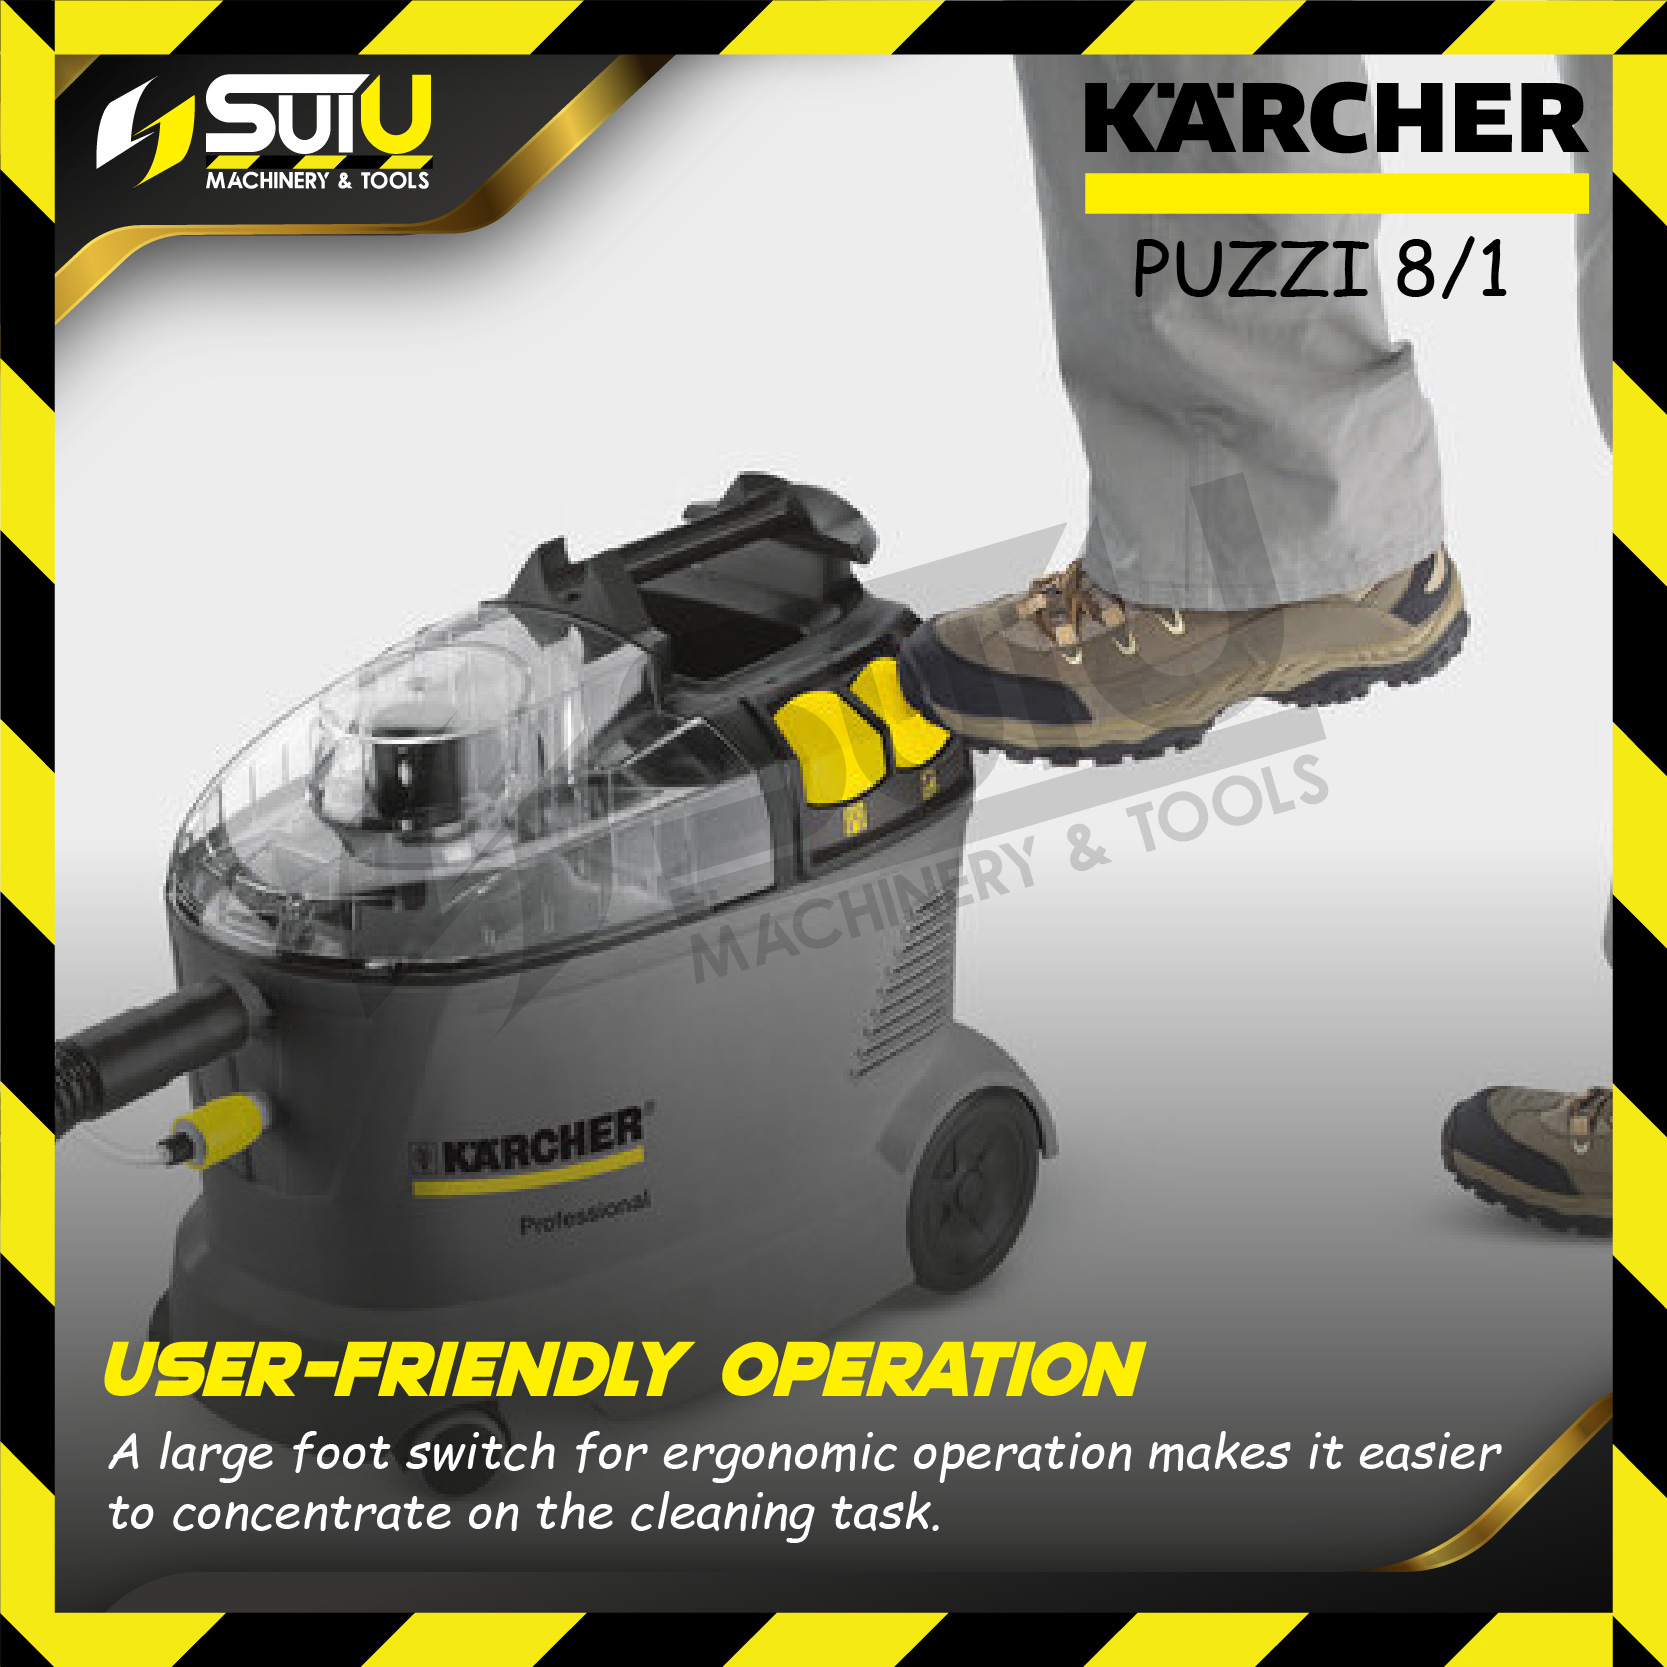 KARCHER PUZZI 8/1 /PUZZI 8/1 C Spray Extraction Cleaner/ Carpet Cleaner/  Upholstery Cleaner/ Pembersih